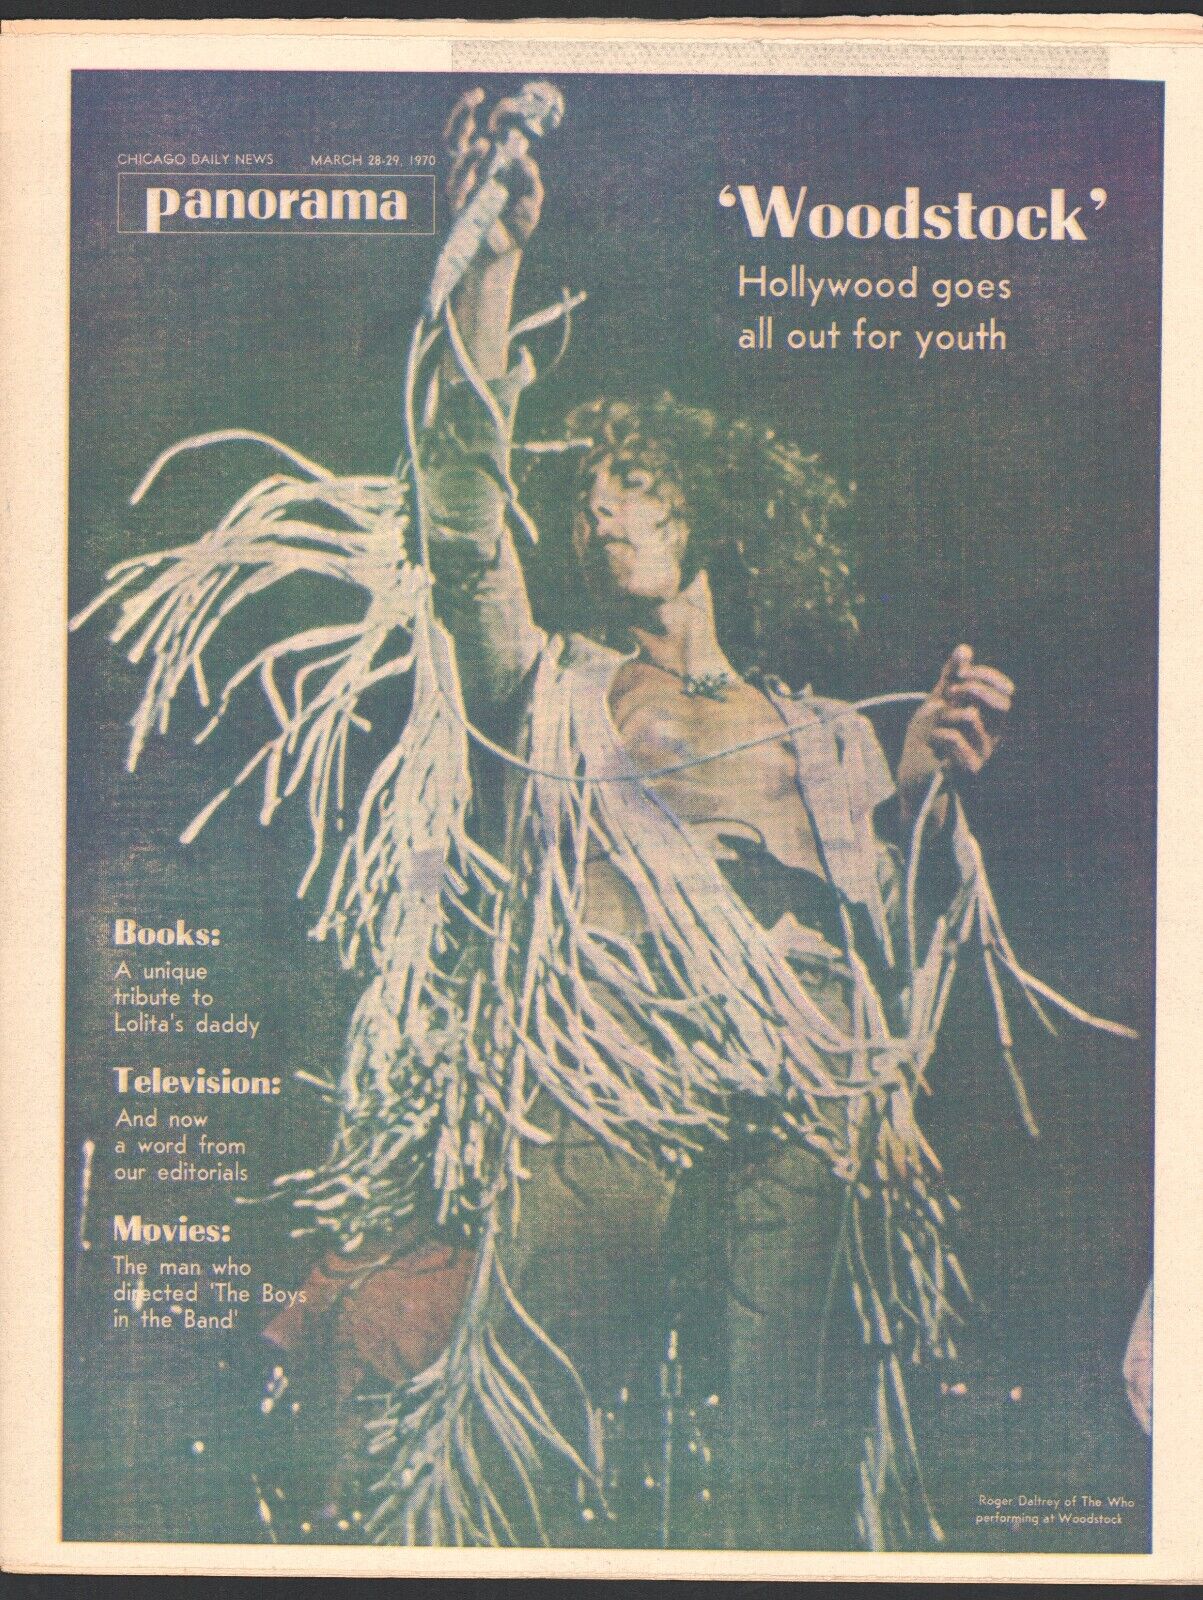 Woodstock 1969 Music Festival on cover Panorama Newspaper March 28 1970 Original